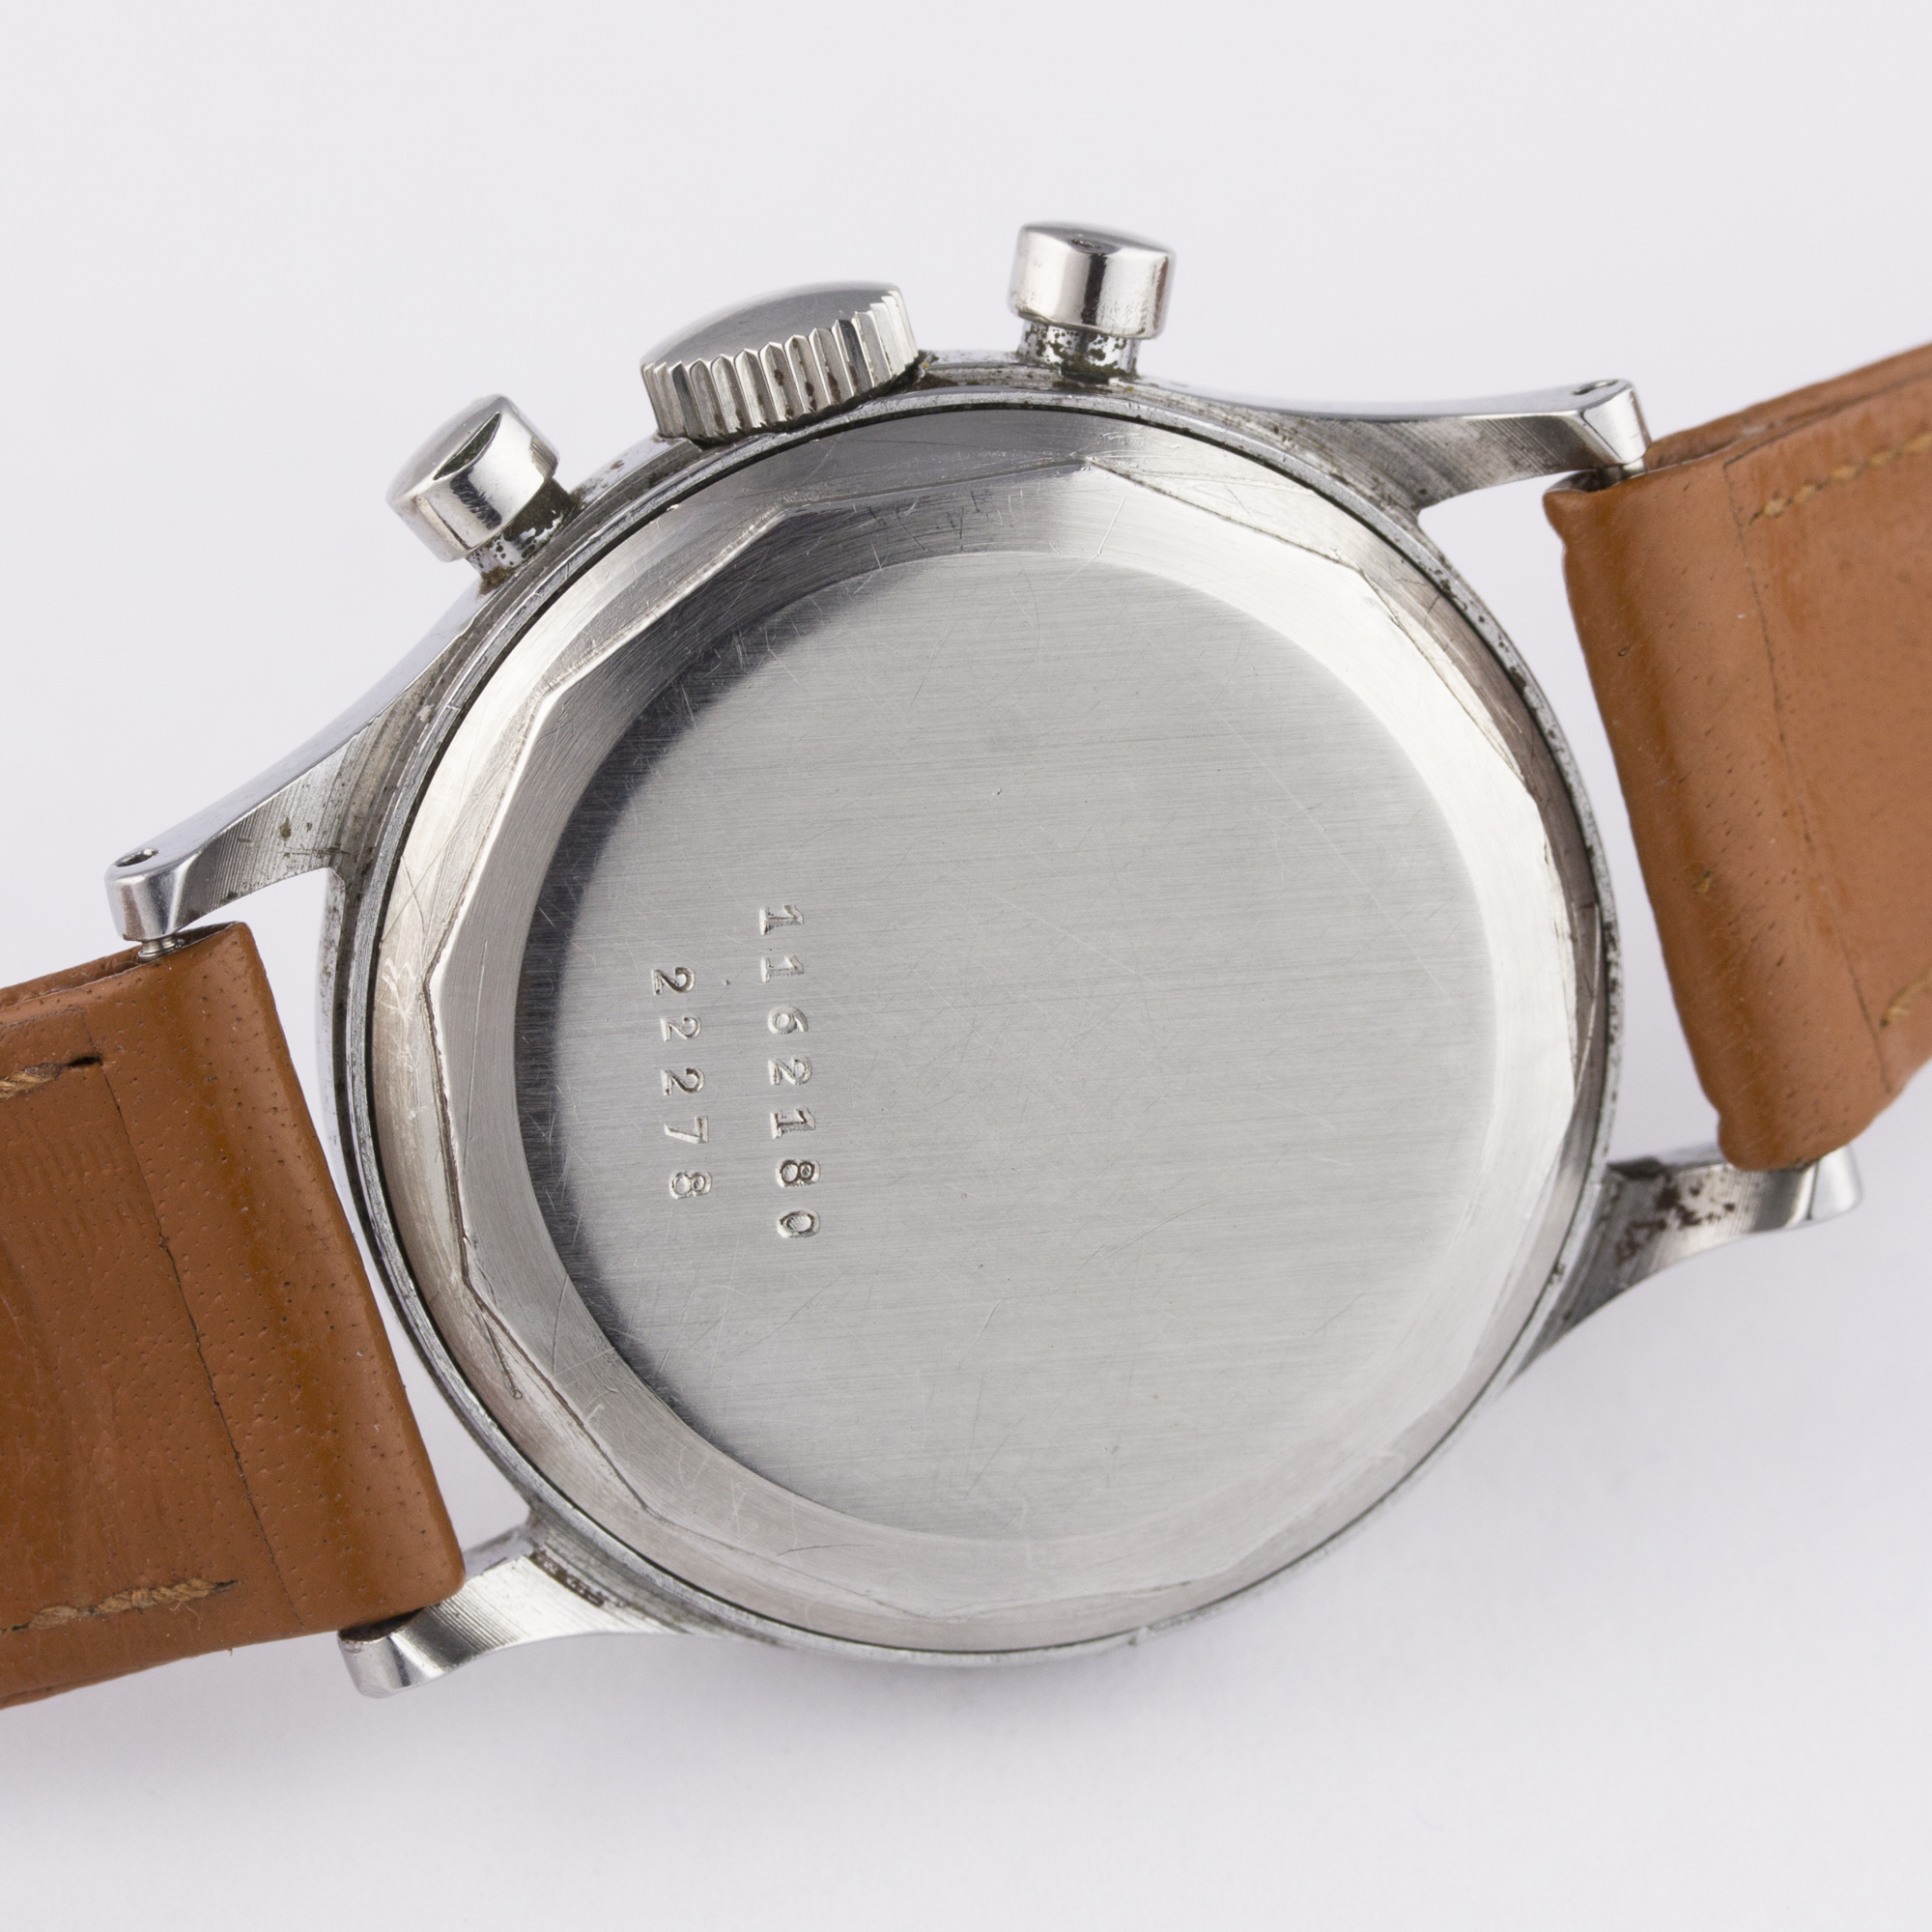 A RARE GENTLEMAN'S STAINLESS STEEL UNIVERSAL GENEVE COMPAX CHRONOGRAPH WRIST WATCH CIRCA 1950s, REF. - Image 6 of 8